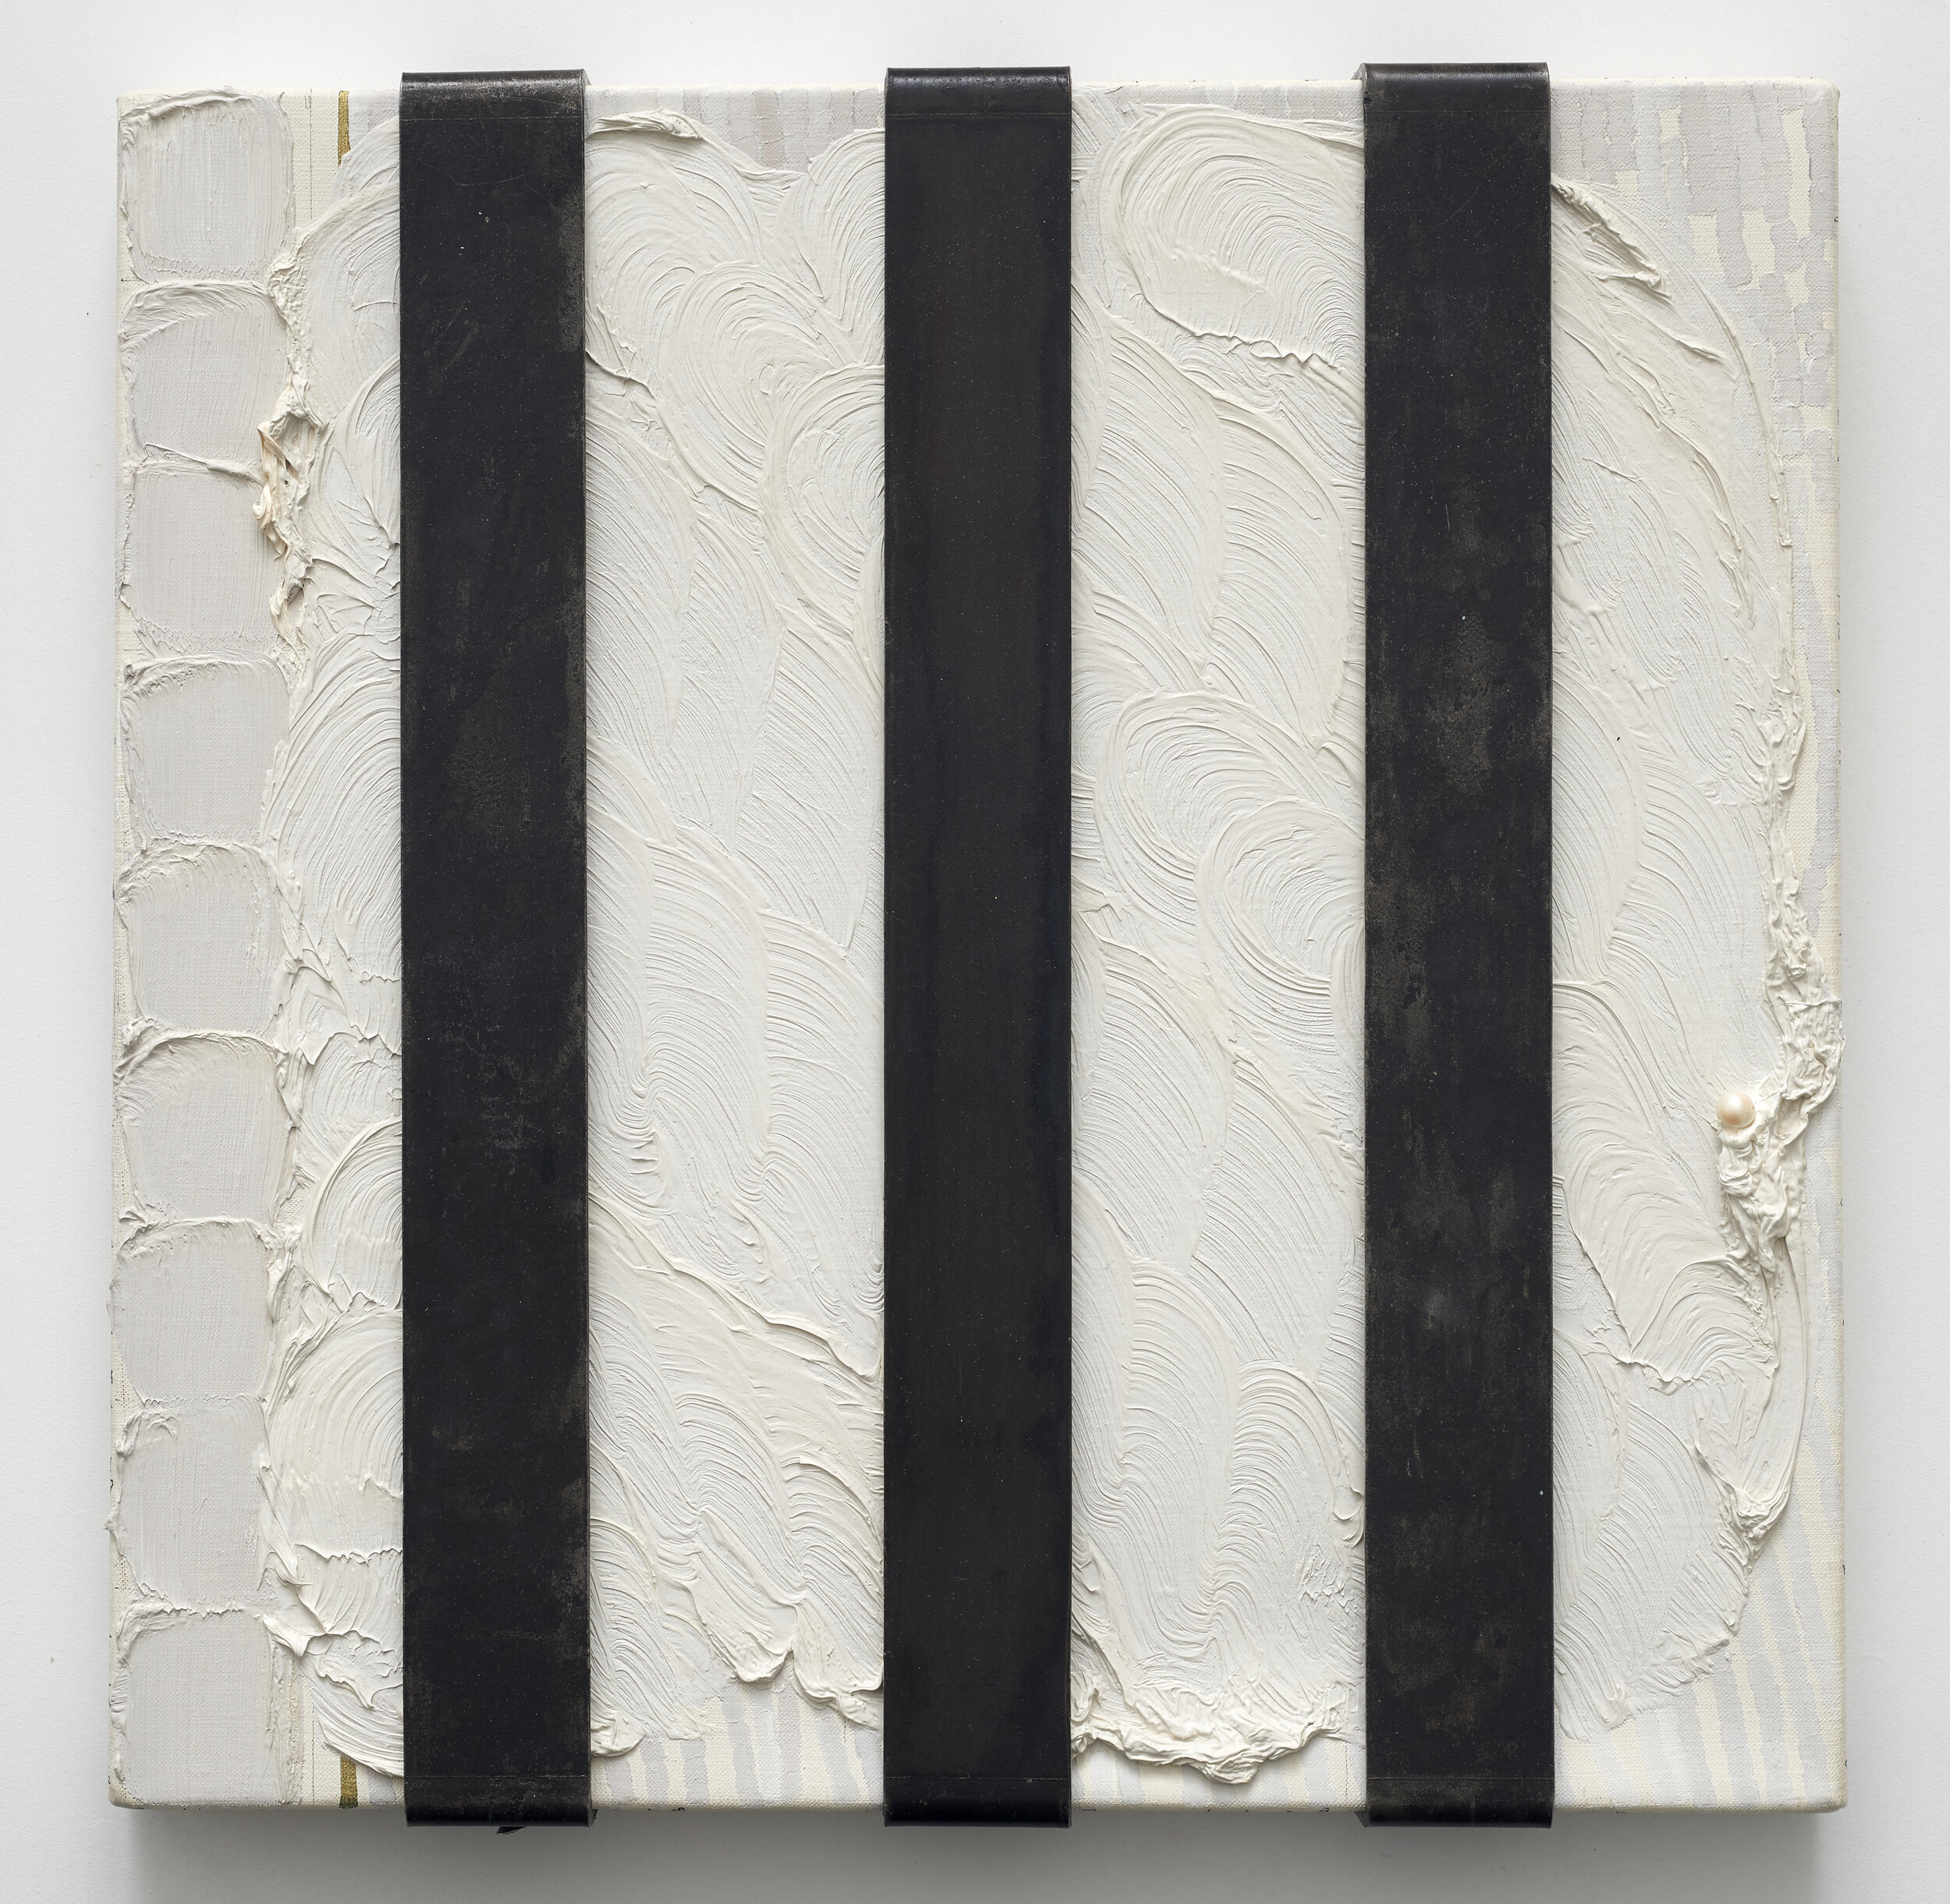  “Love Song”, 2013-2019, oil on canvas and steel bars with a pearl, 14 x 14 in 